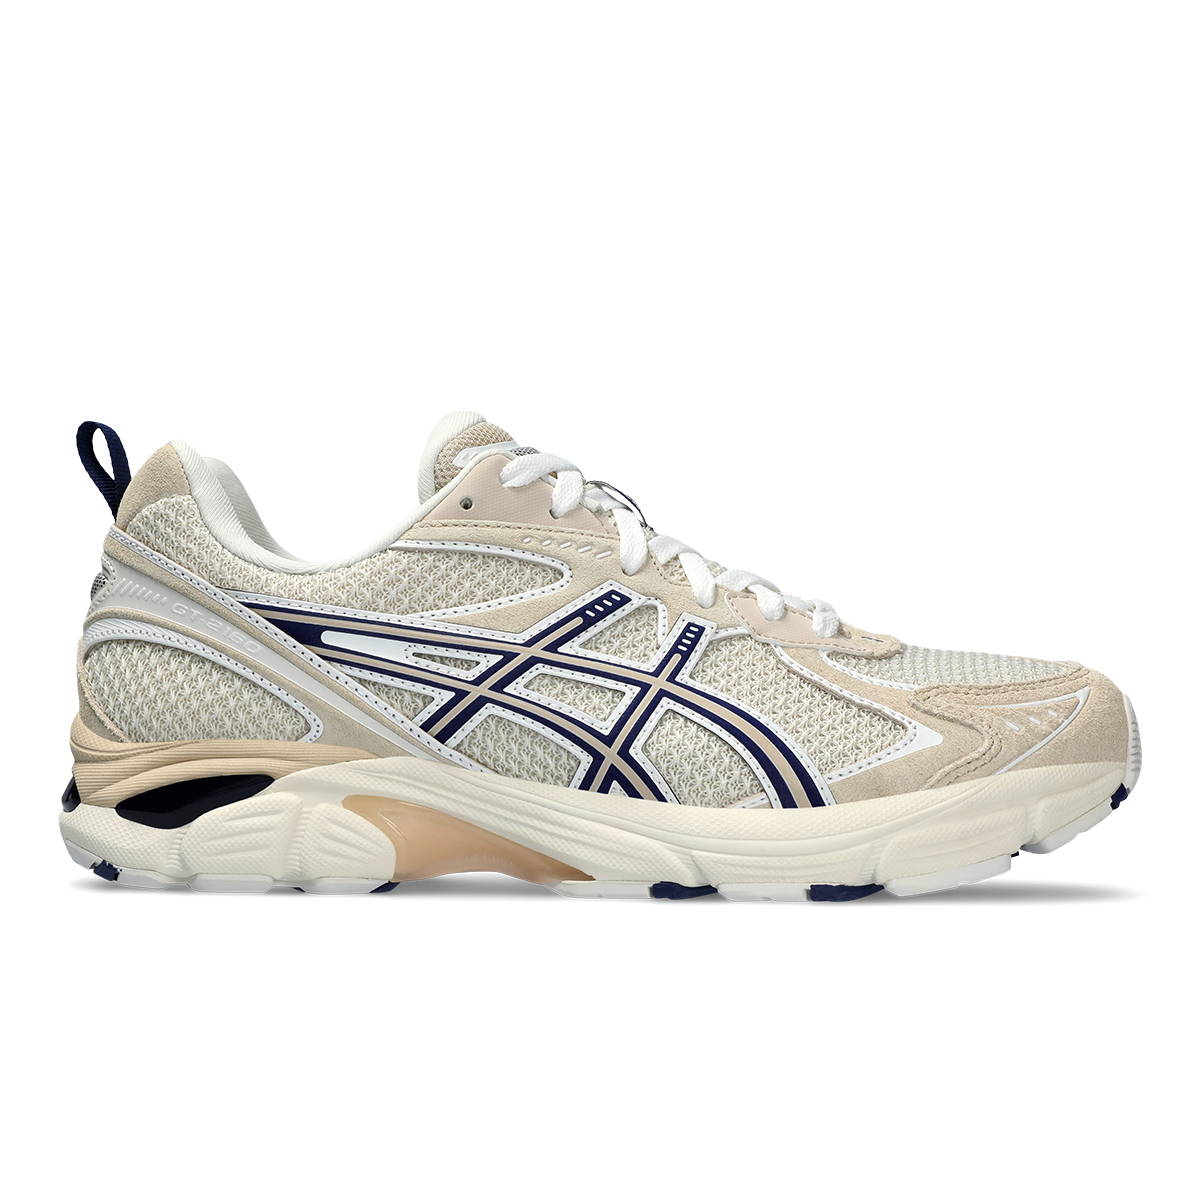 Asics x Costs GT-2160 - Upcoming Releases | Bodega